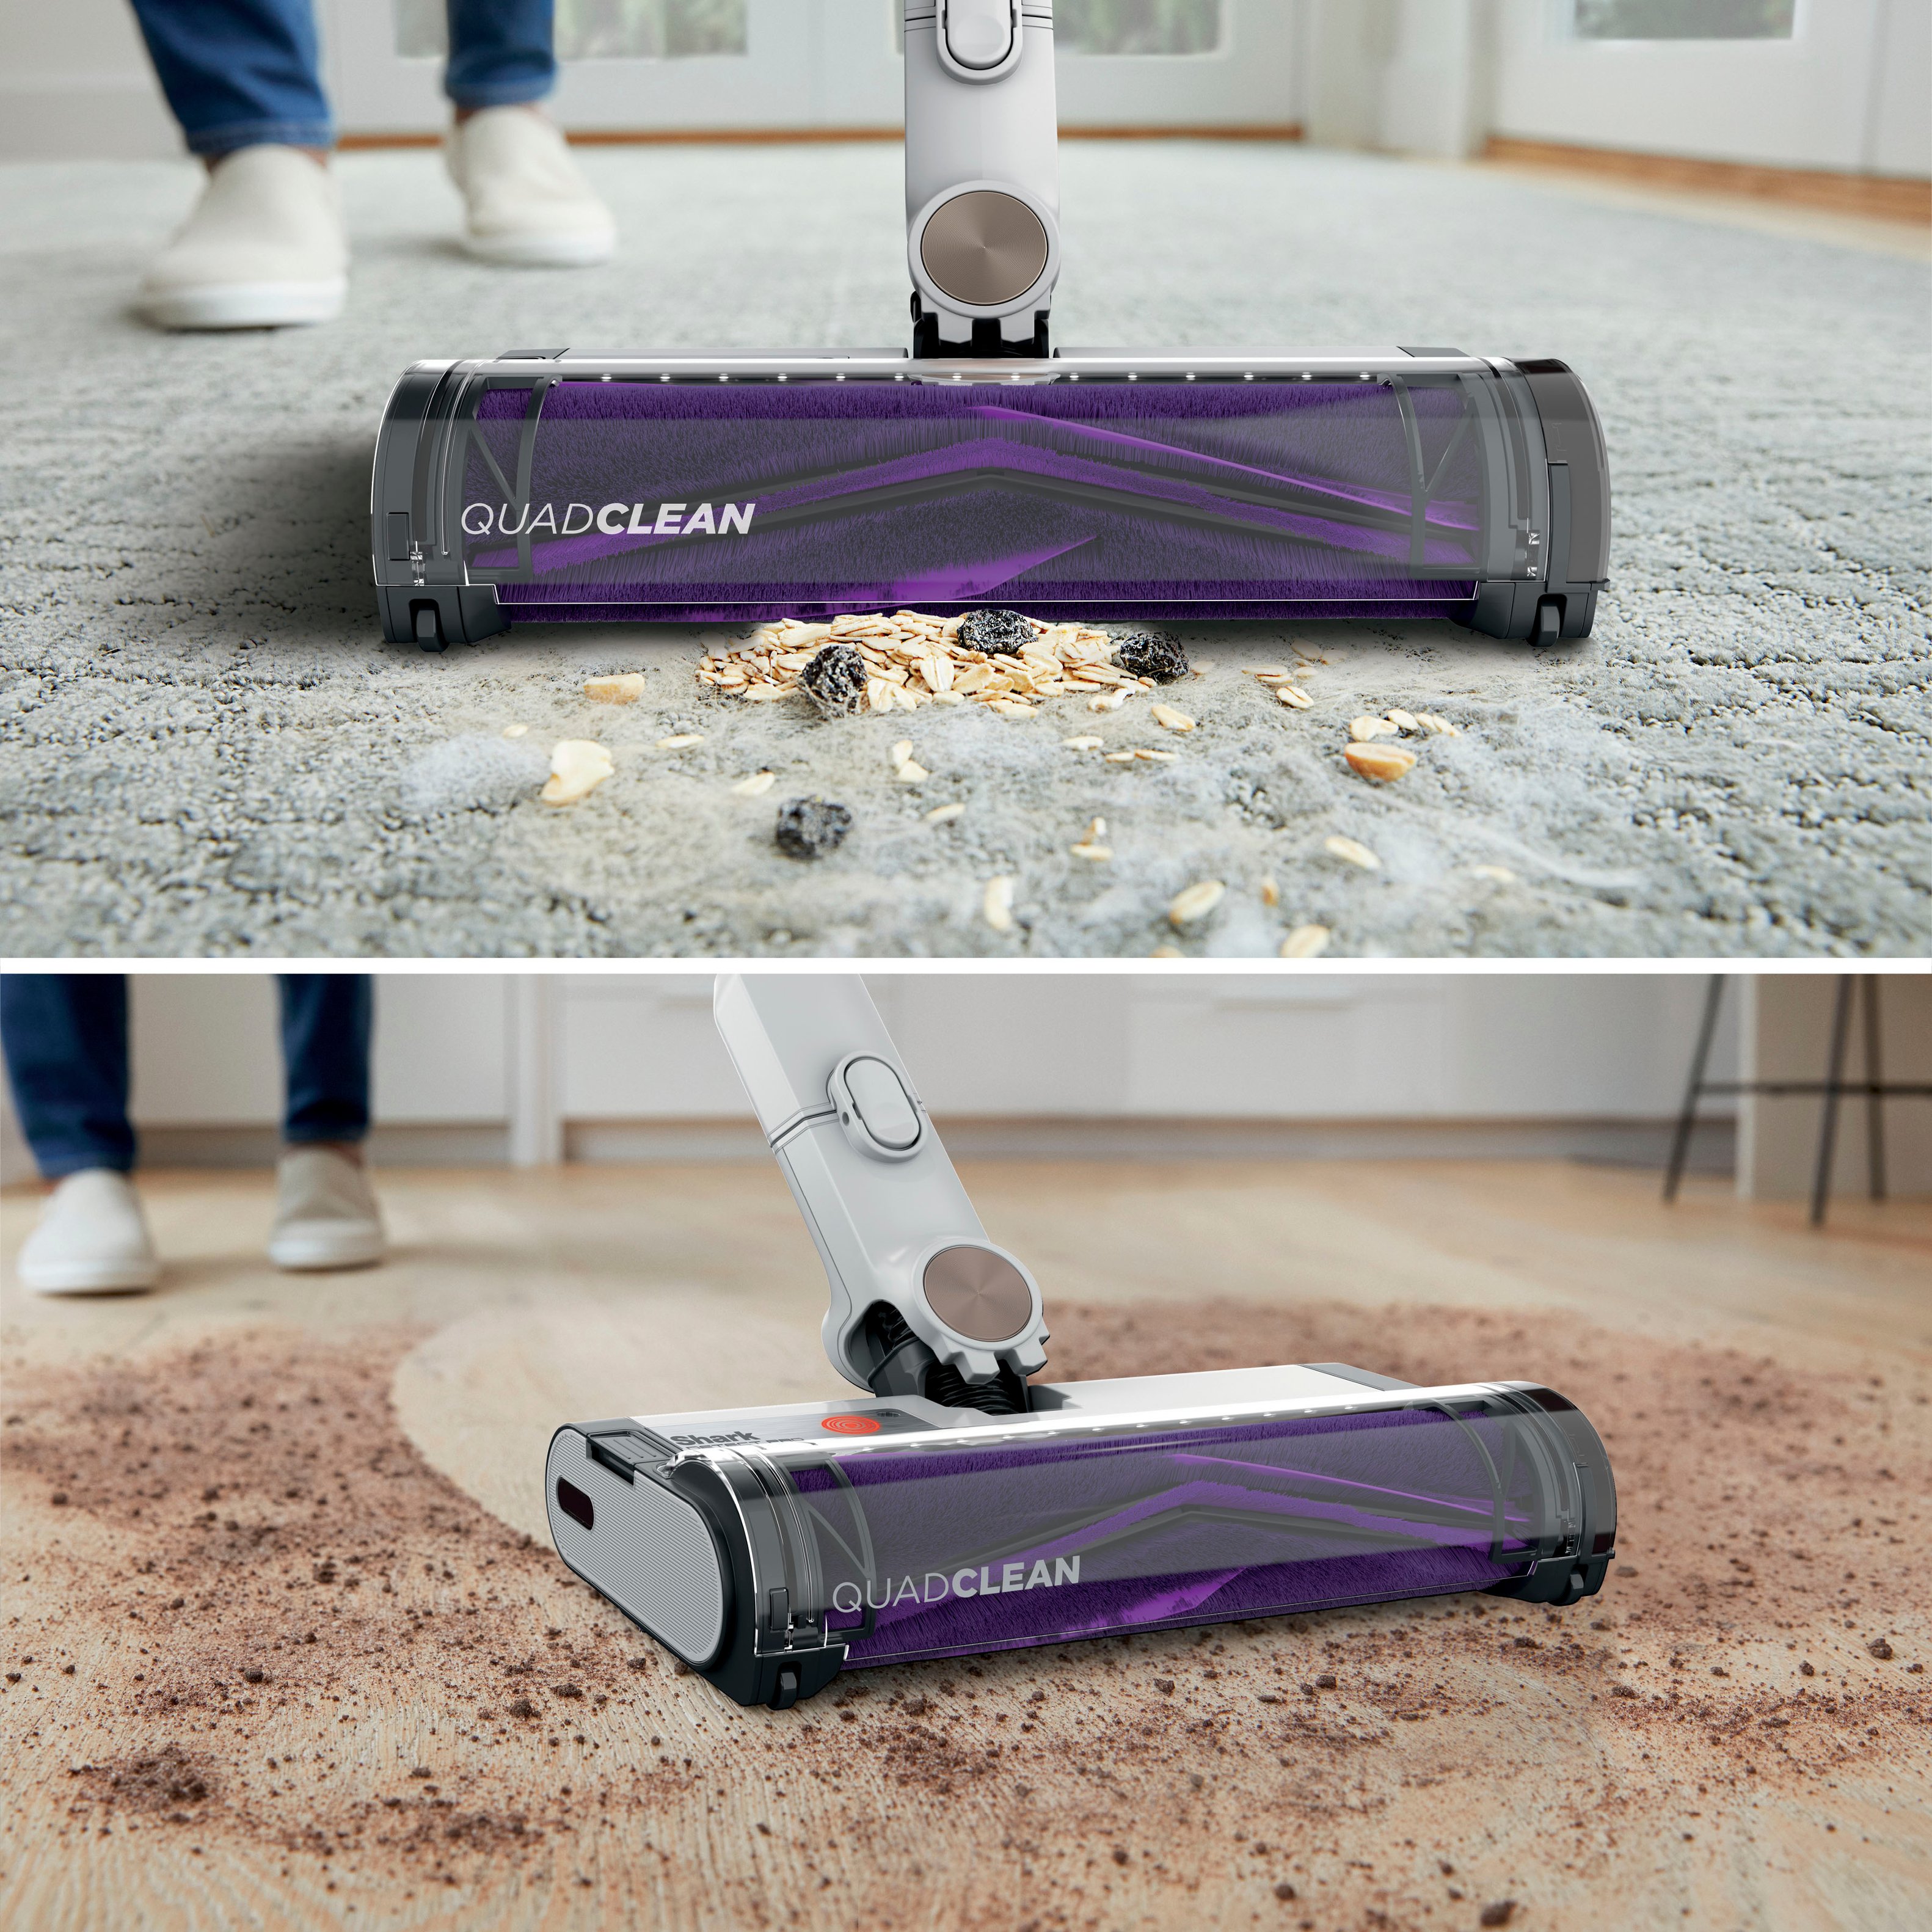 Shark IW3611 Detect Pro Auto Empty System Cordless Vacuum at The